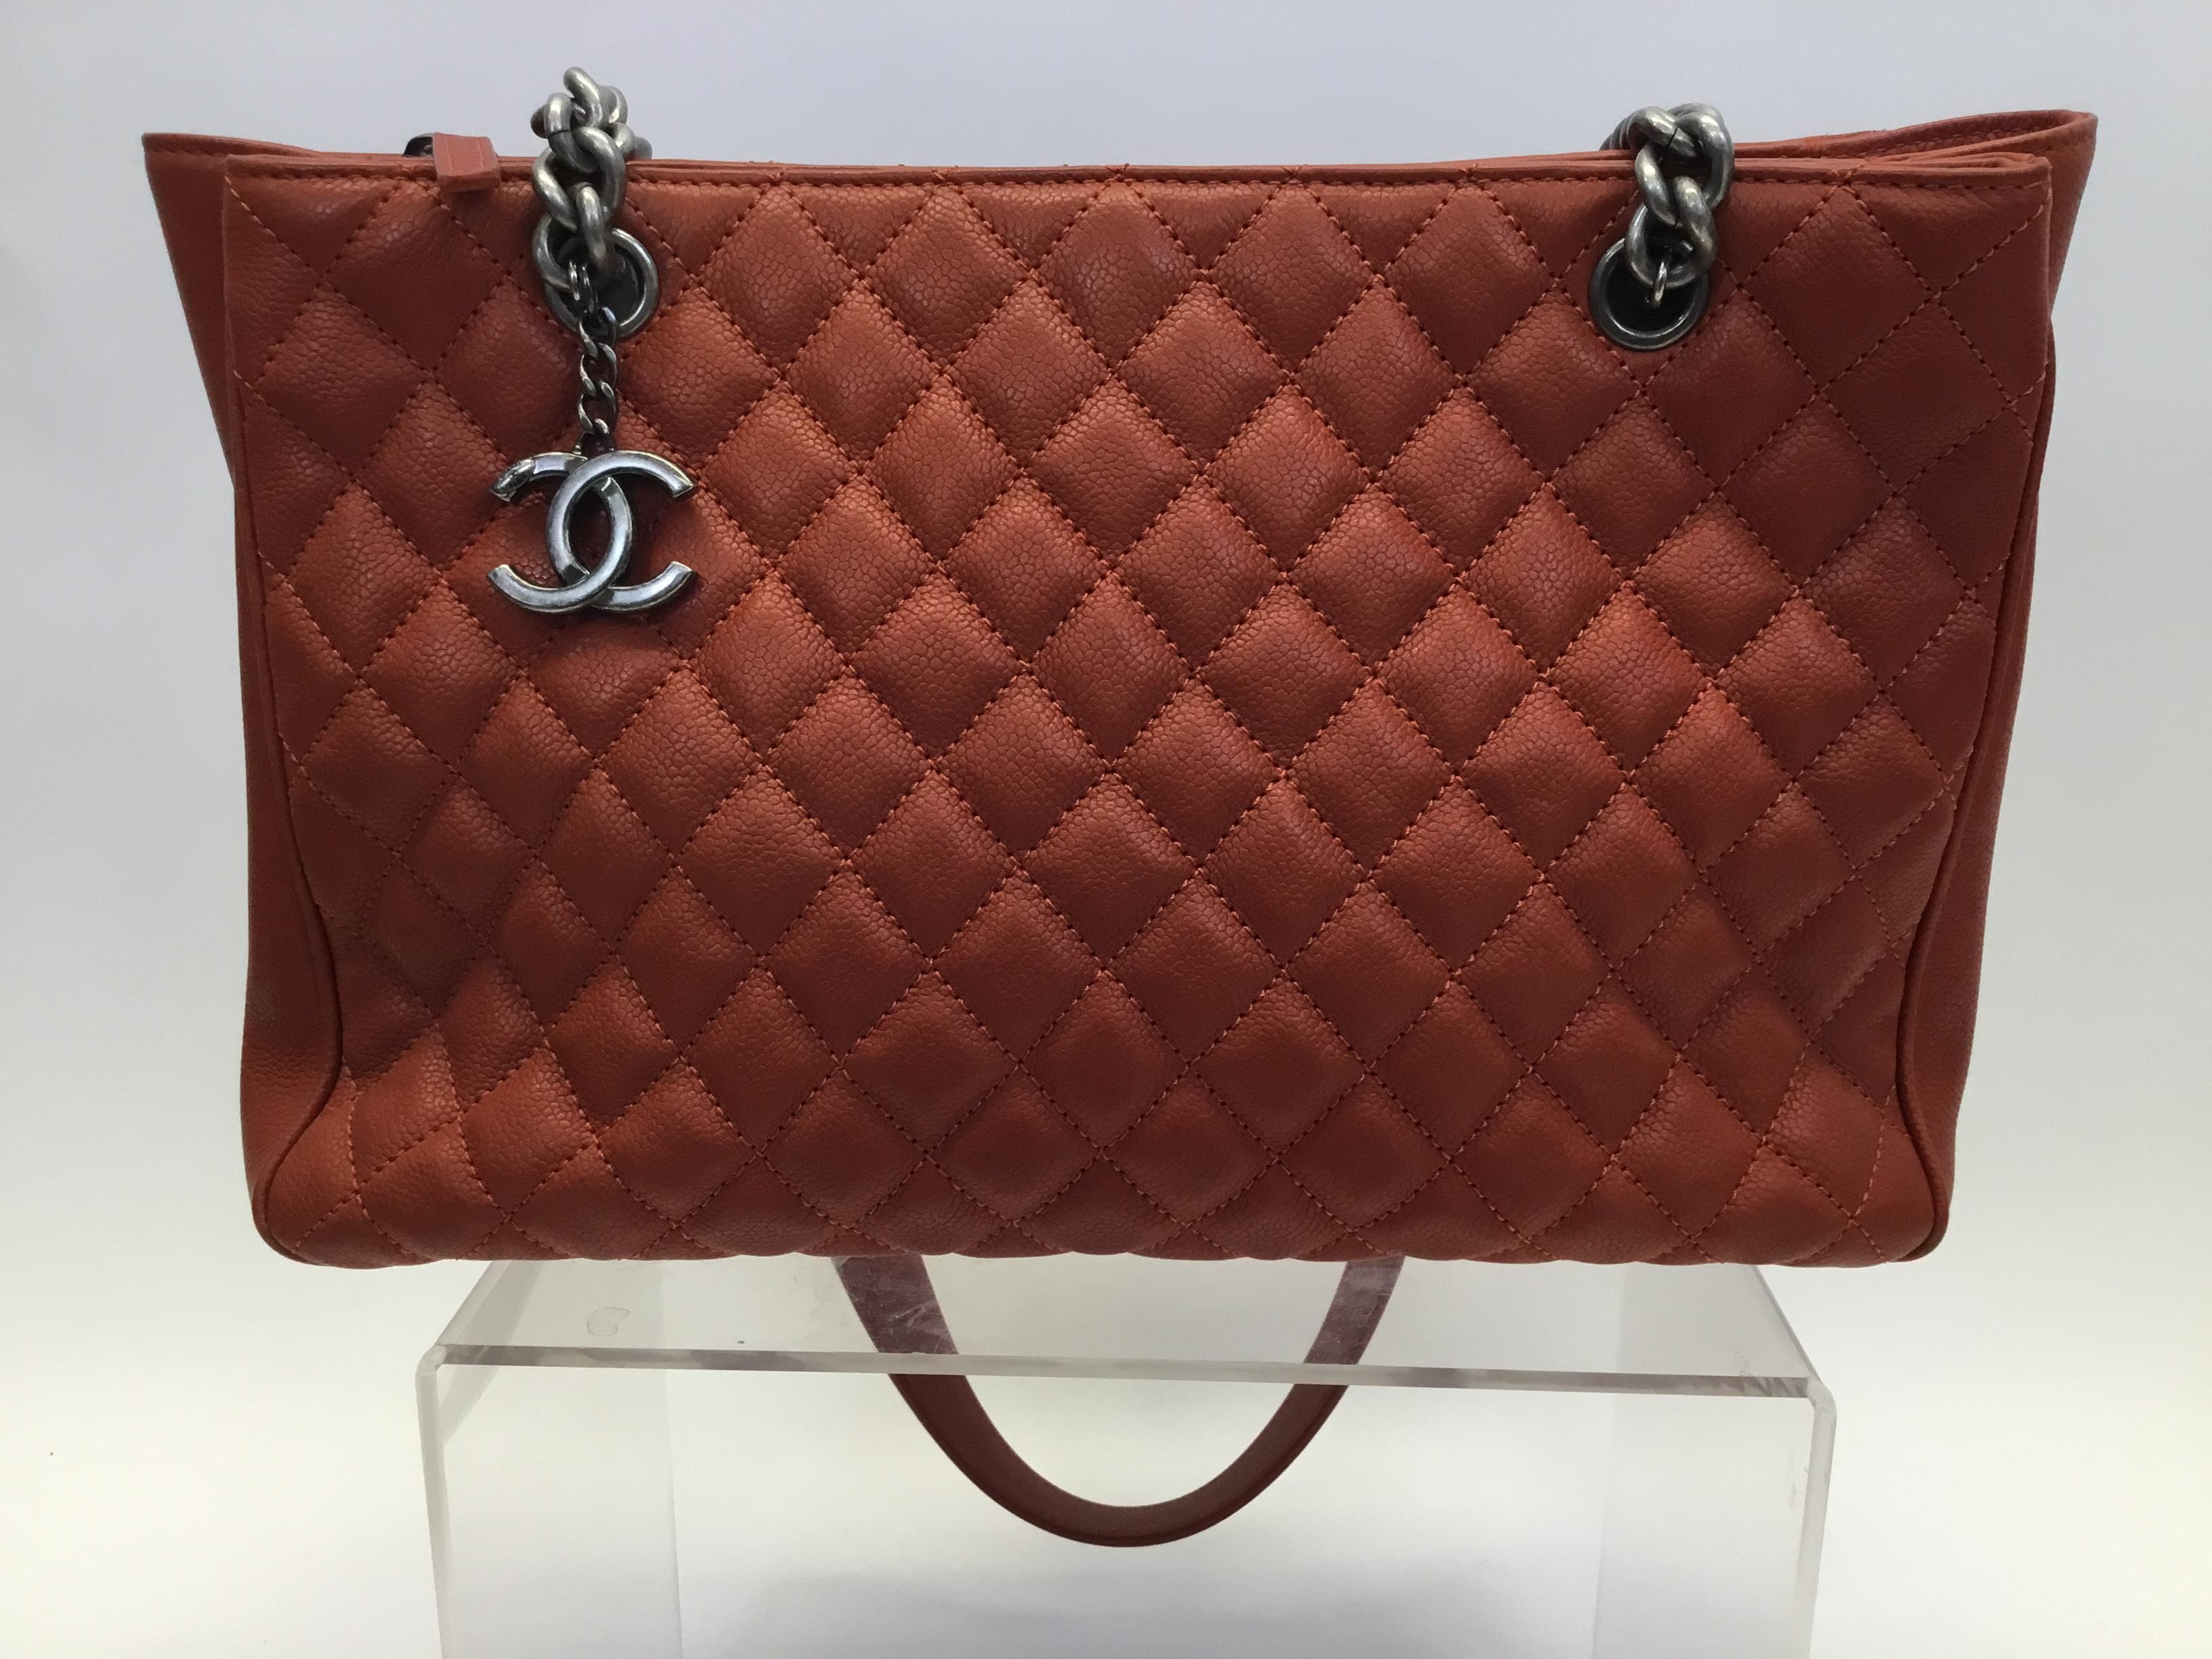 Chanel 'Rock in Rome' Red Quilted Tote
$2899
Made in Italy
Leather 
Date Code: 23120208
13.5” x 9” x 4.5”